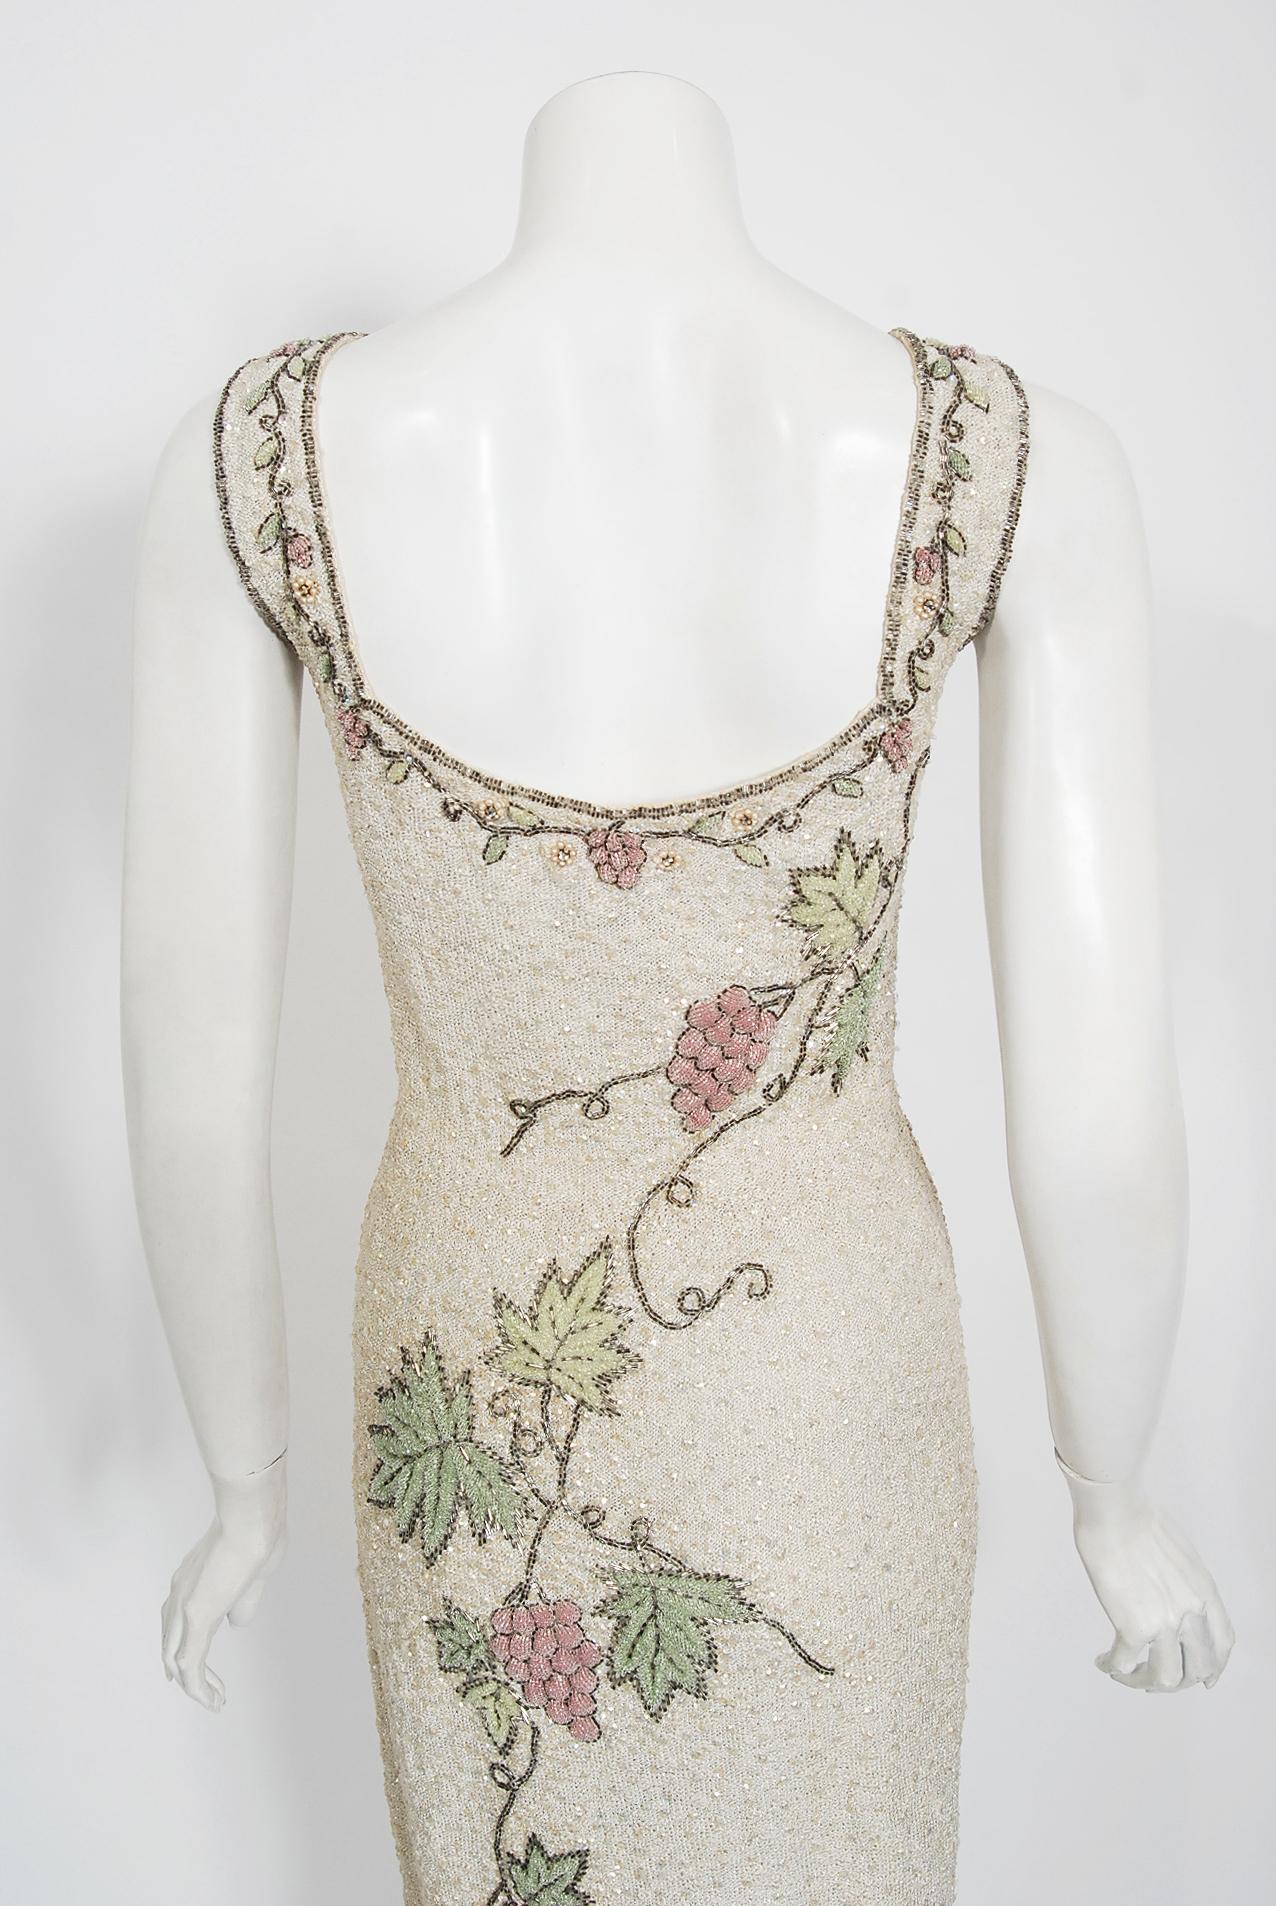 Vintage 1950's Beaded Grapevine Motif Hand-Knit Sequin Wool Hourglass Dress 5